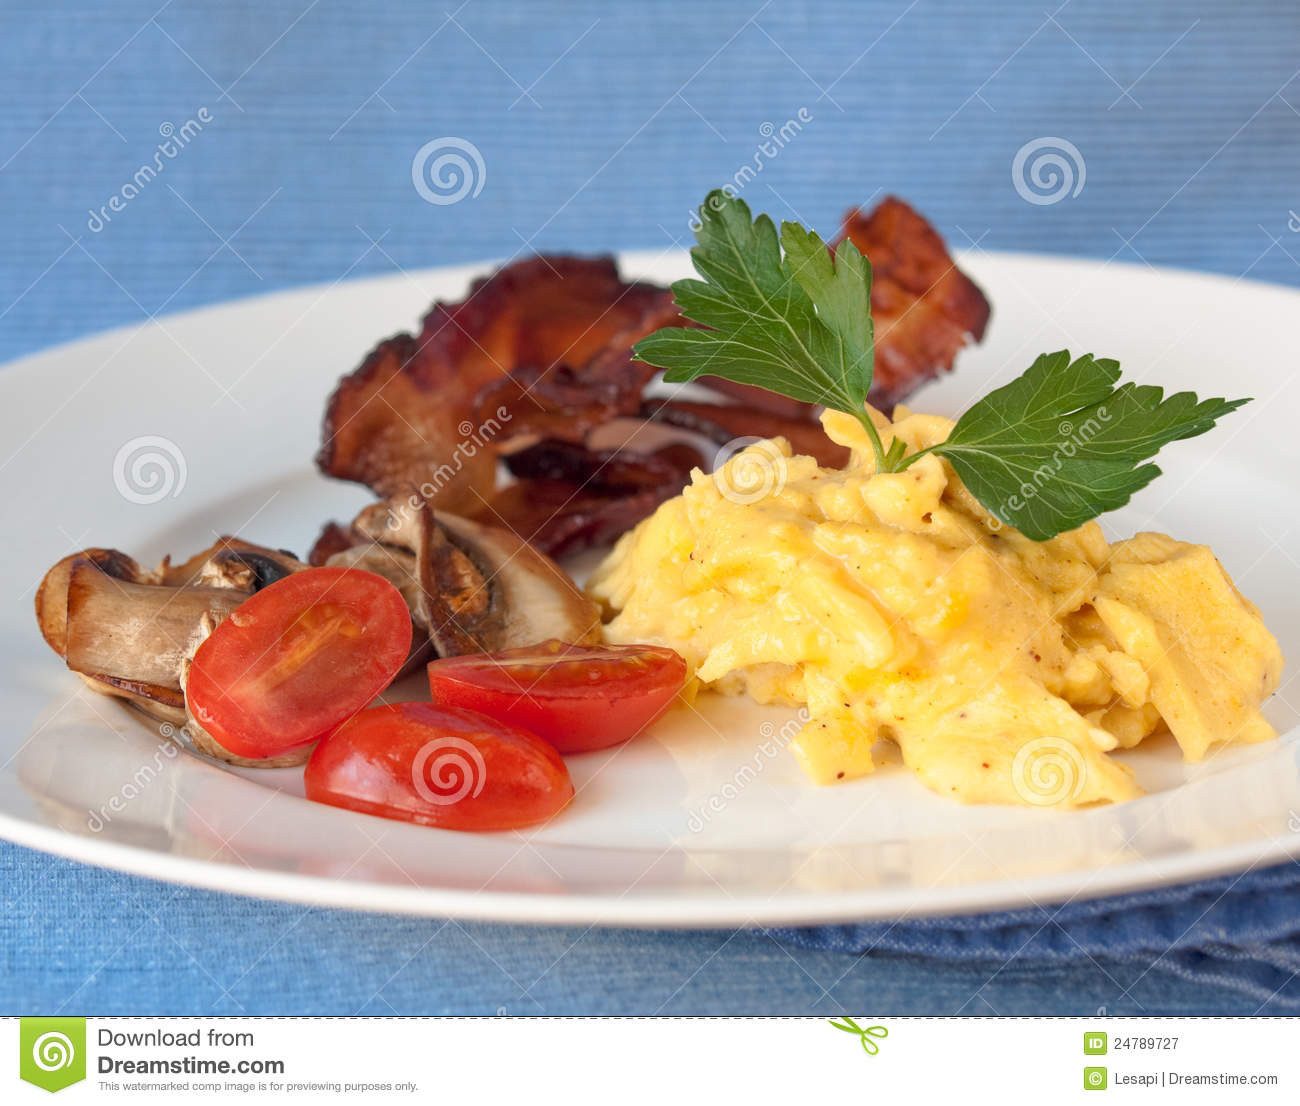 High Protein Breakfast No Eggs
 High Protein Breakfast Eggs And Bacon Royalty Free Stock